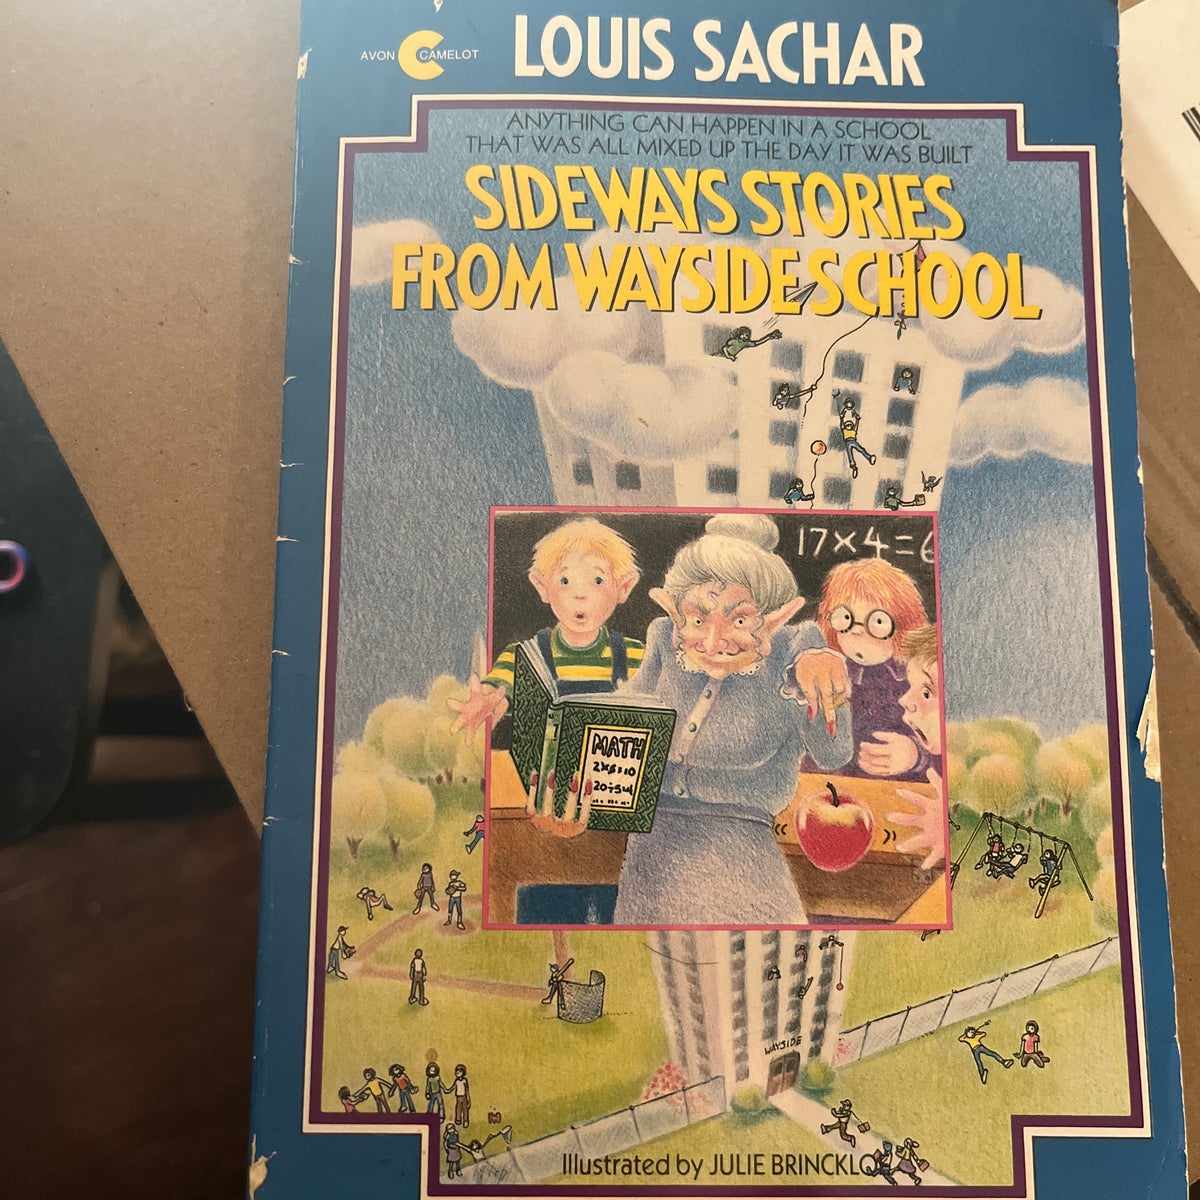 The Wayside School 4-Book Box Set - by Louis Sachar (Paperback)